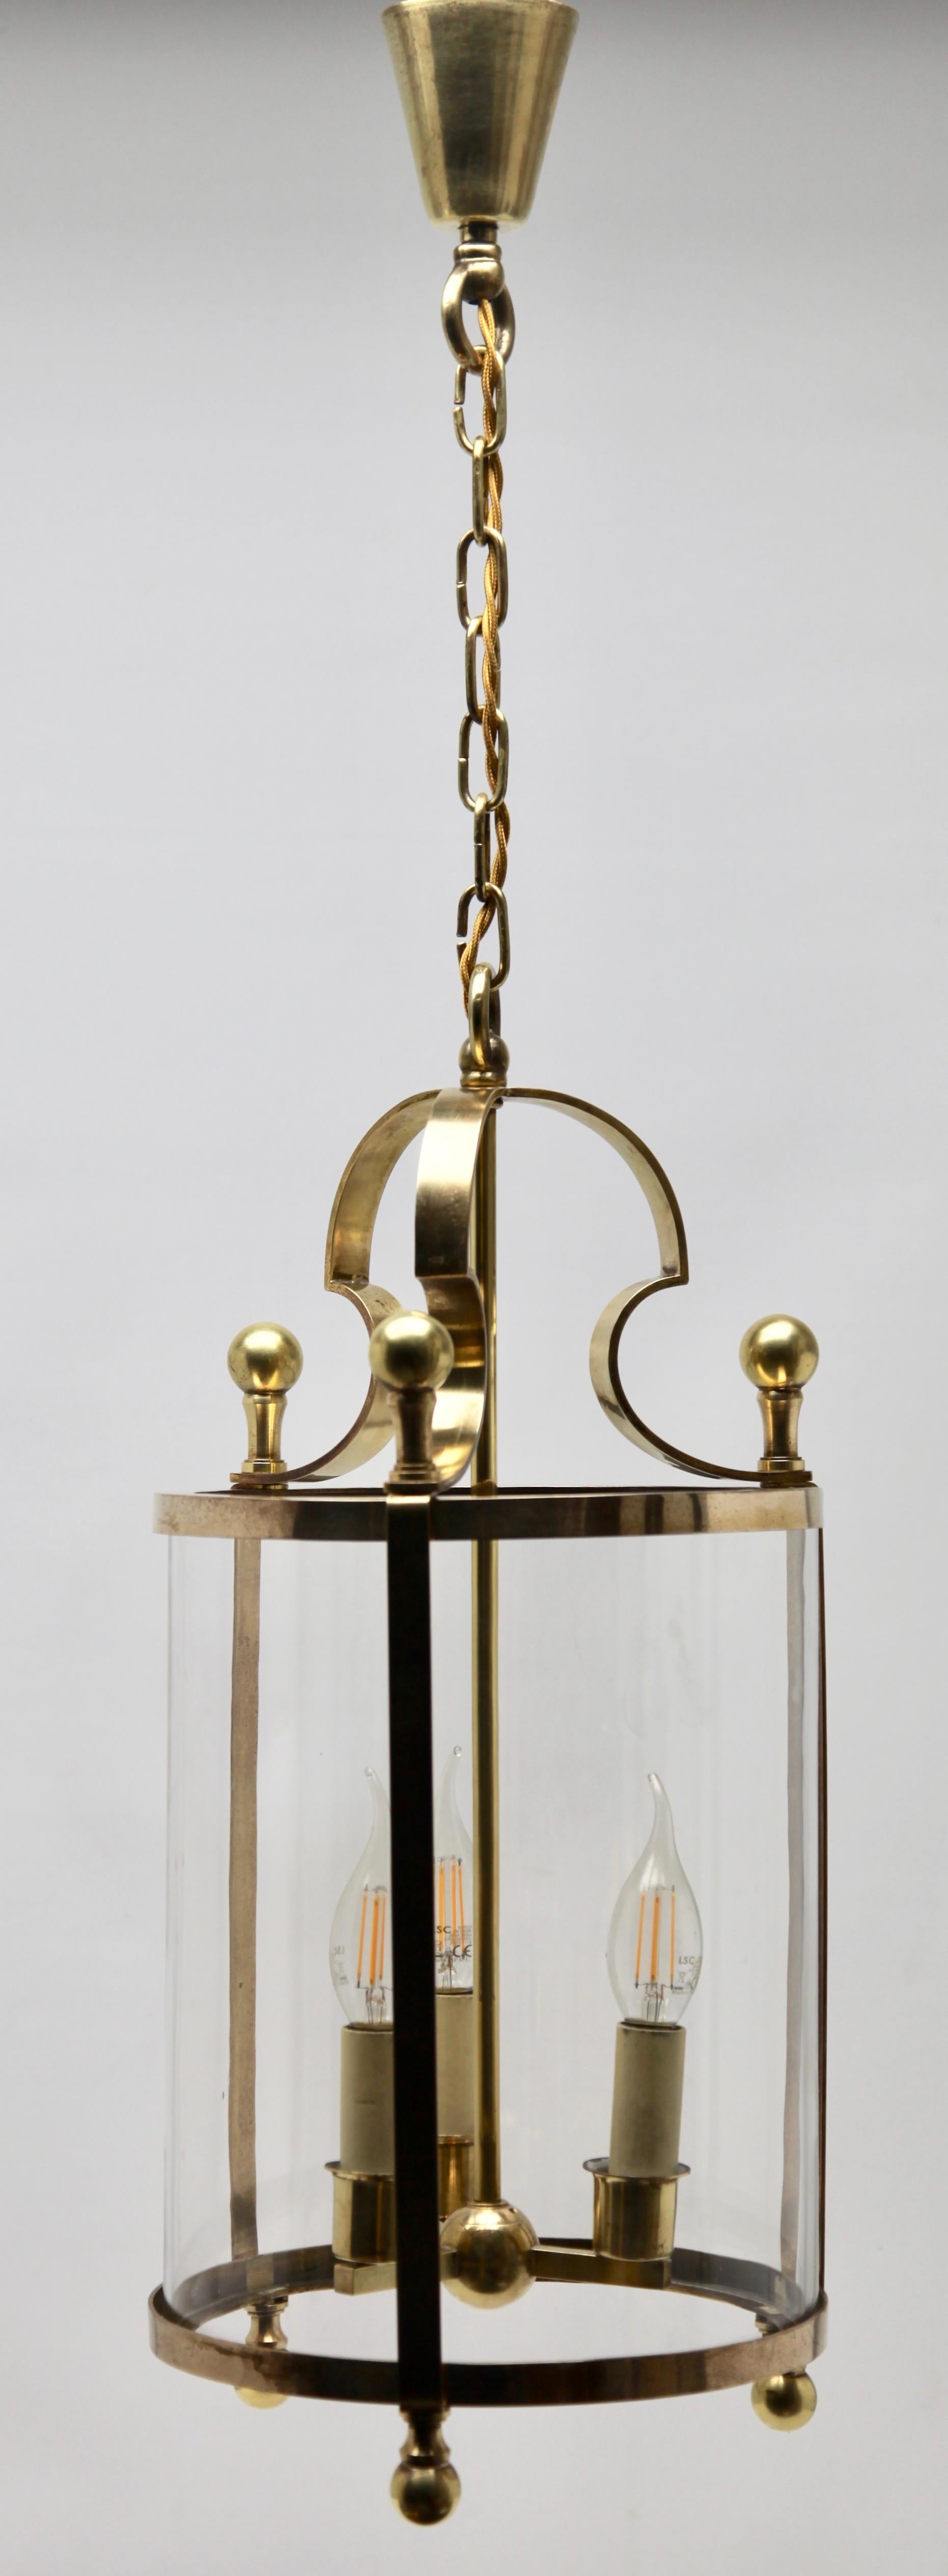 Empire Solid Brass and Glass Lantern or Pendant Lamp For Sale